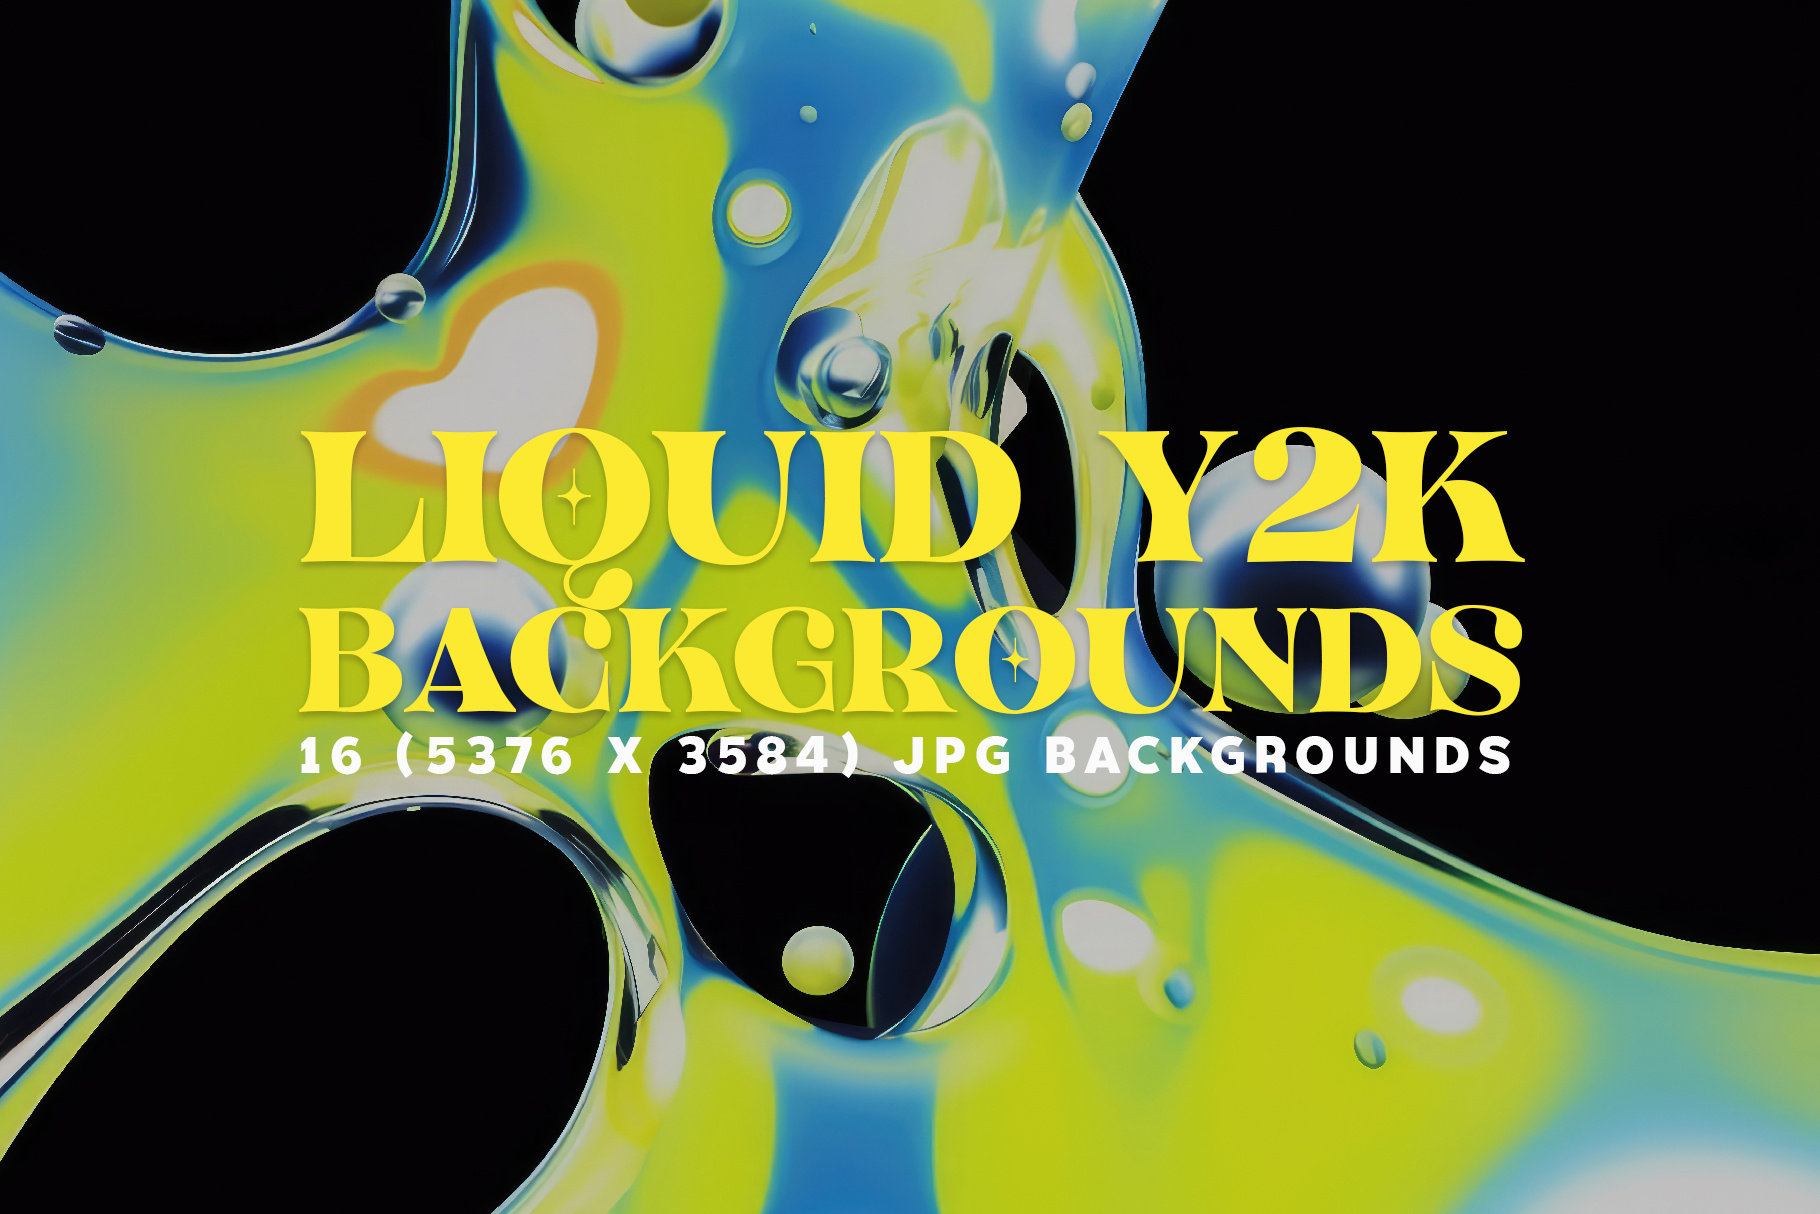 16 Liquid Green and Black Y2K Backgrounds by HipFonts on Dribbble